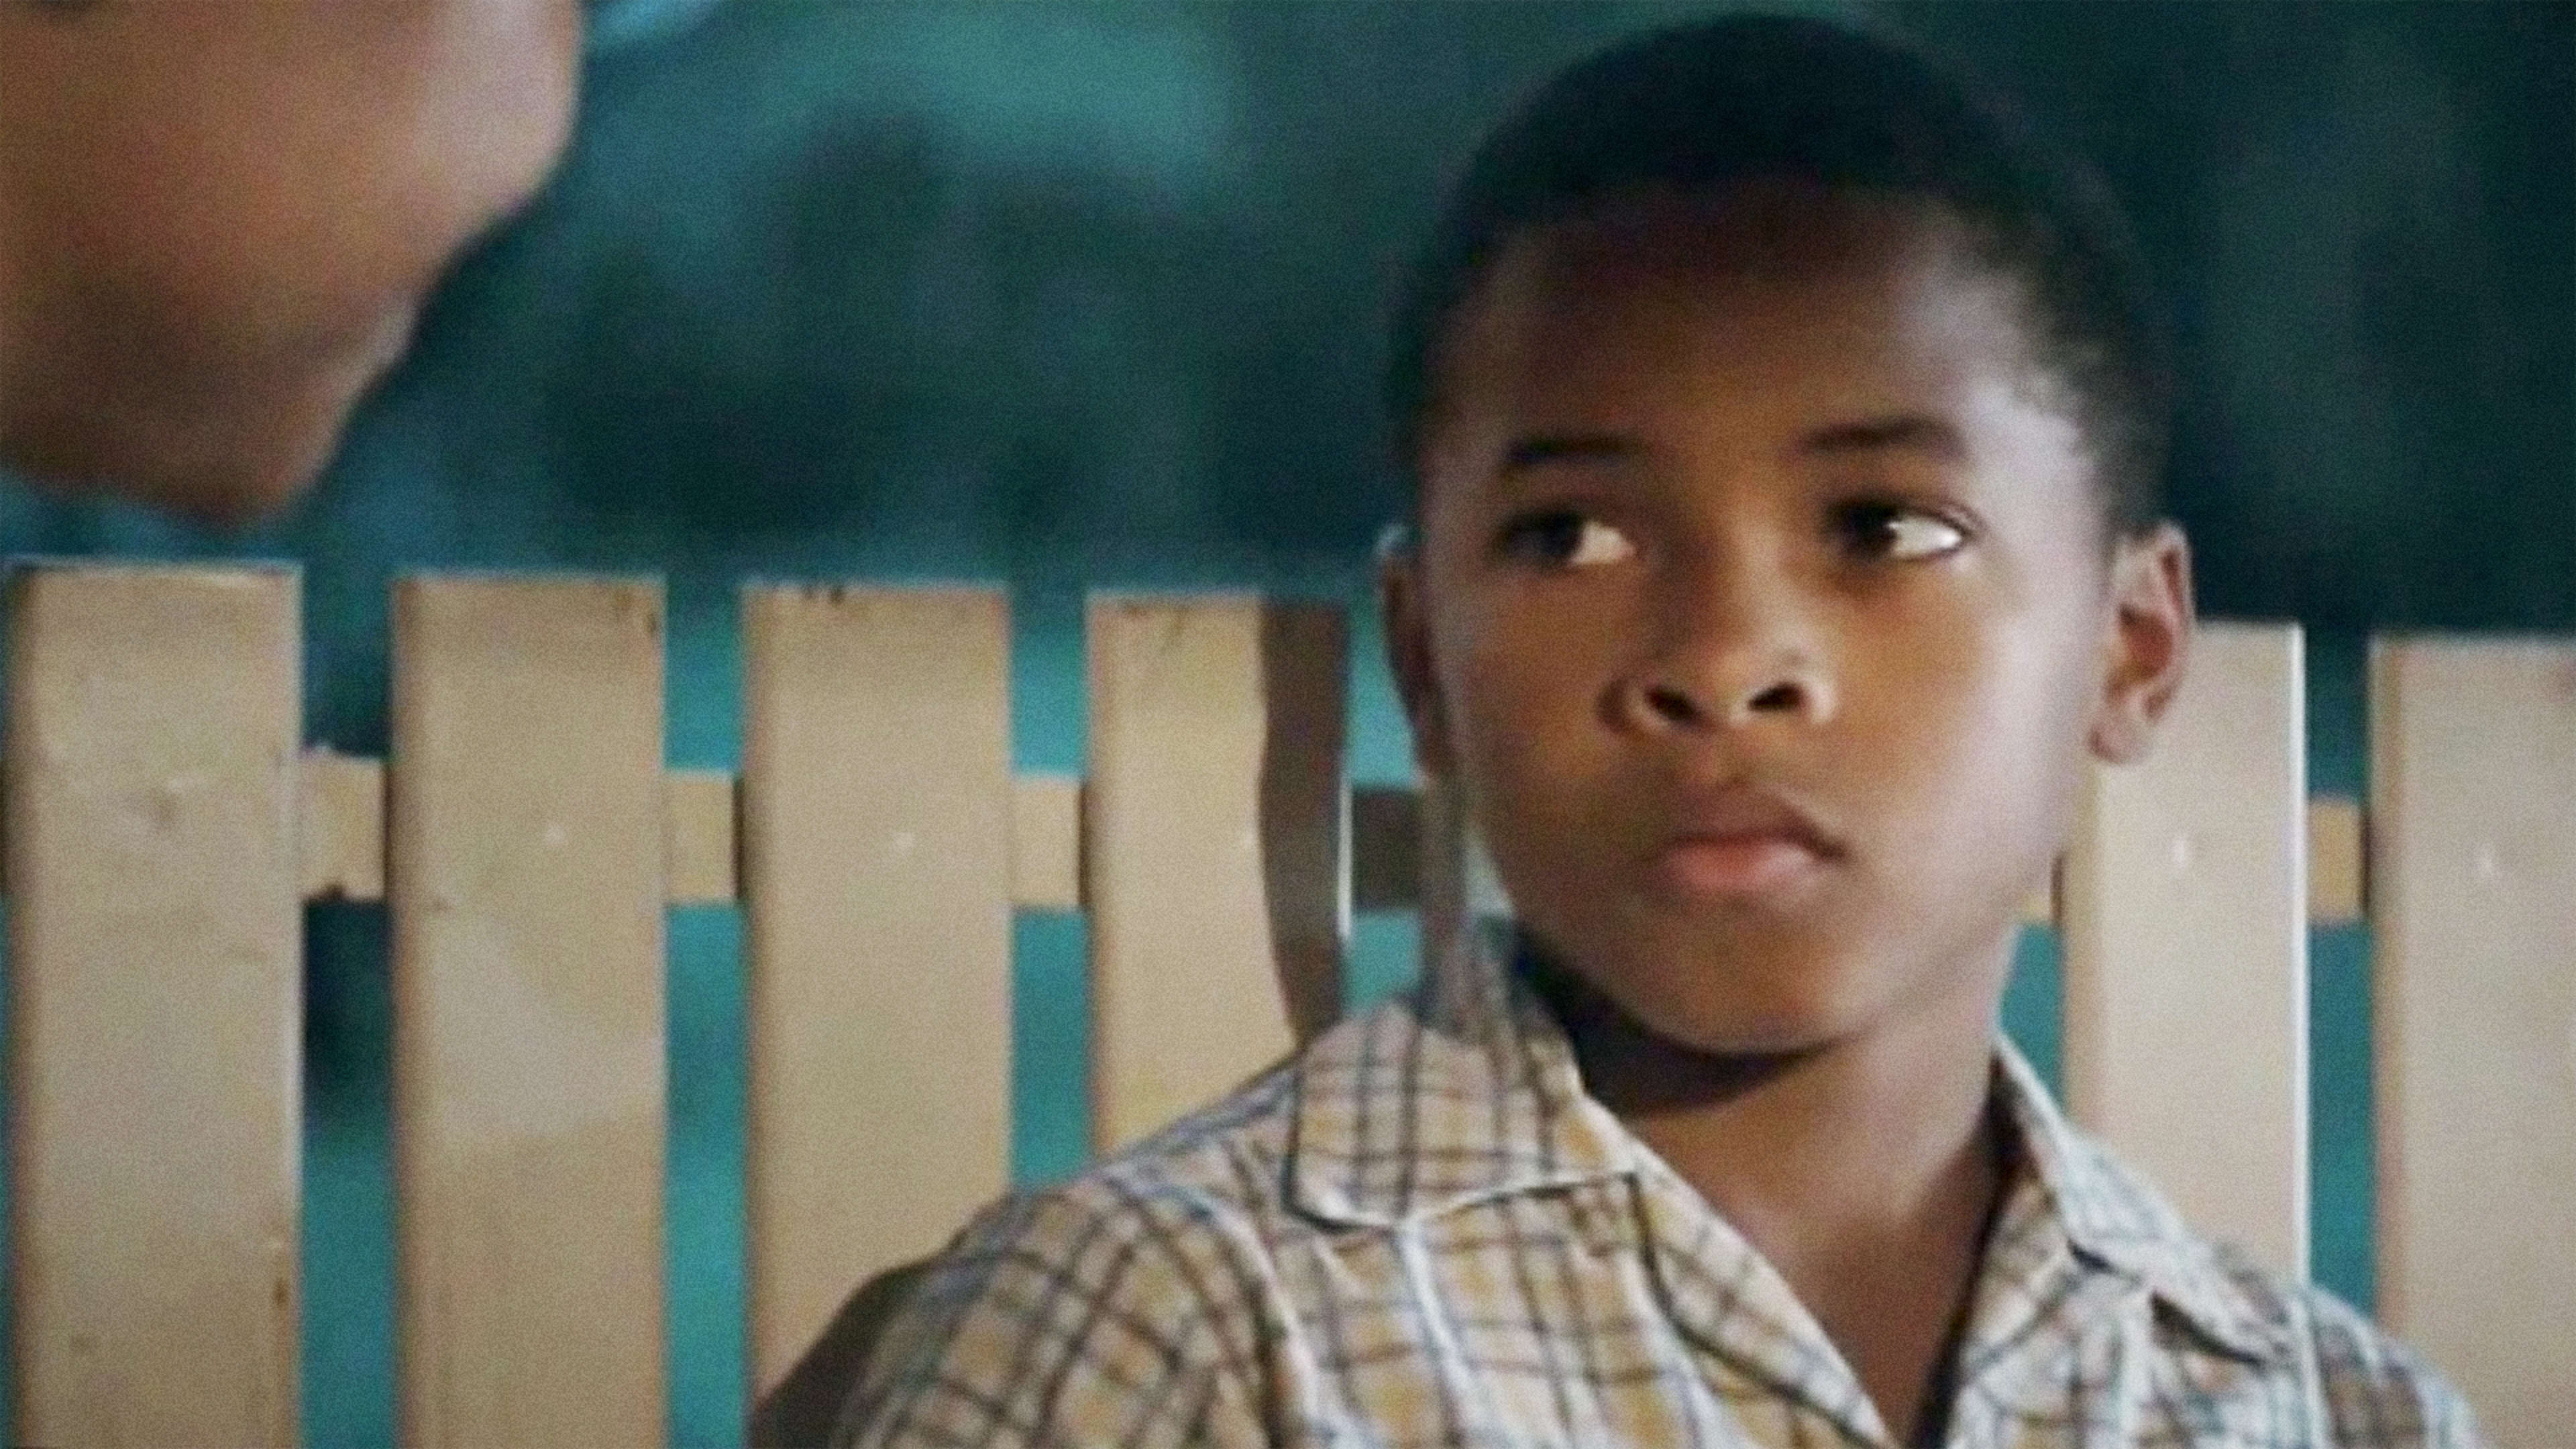 This Ad Starkly Depicts Black Parents Having “The Talk” With Their Kids